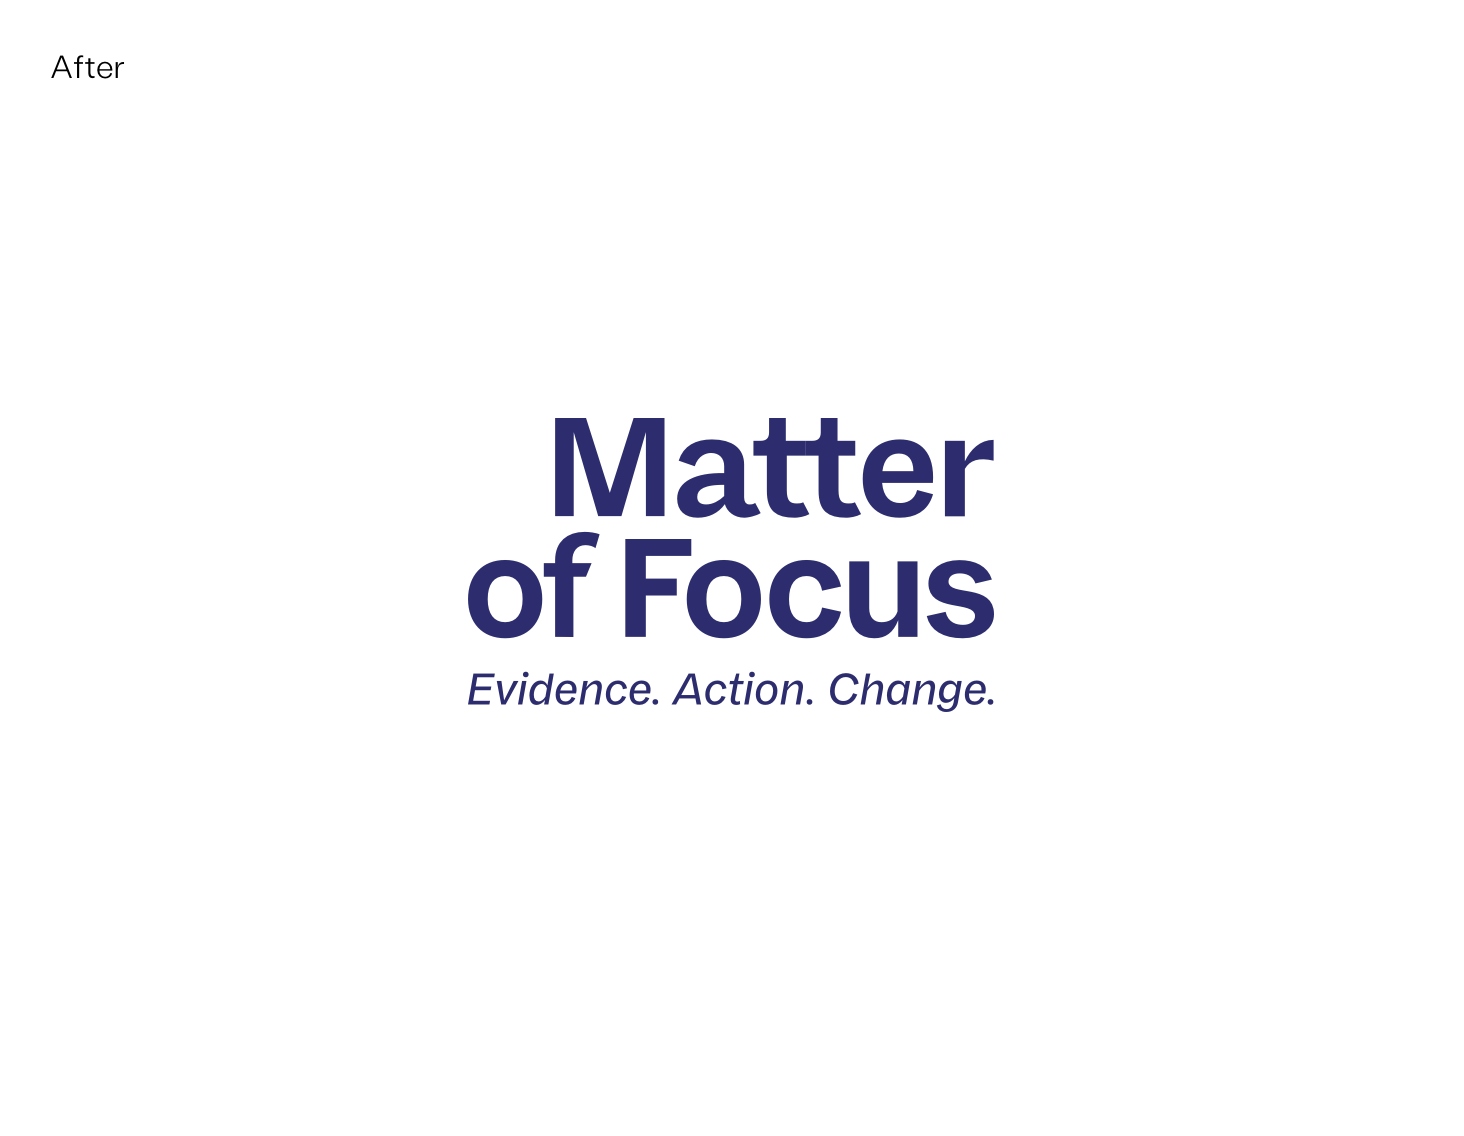 “Matter of Focus” typography and logo